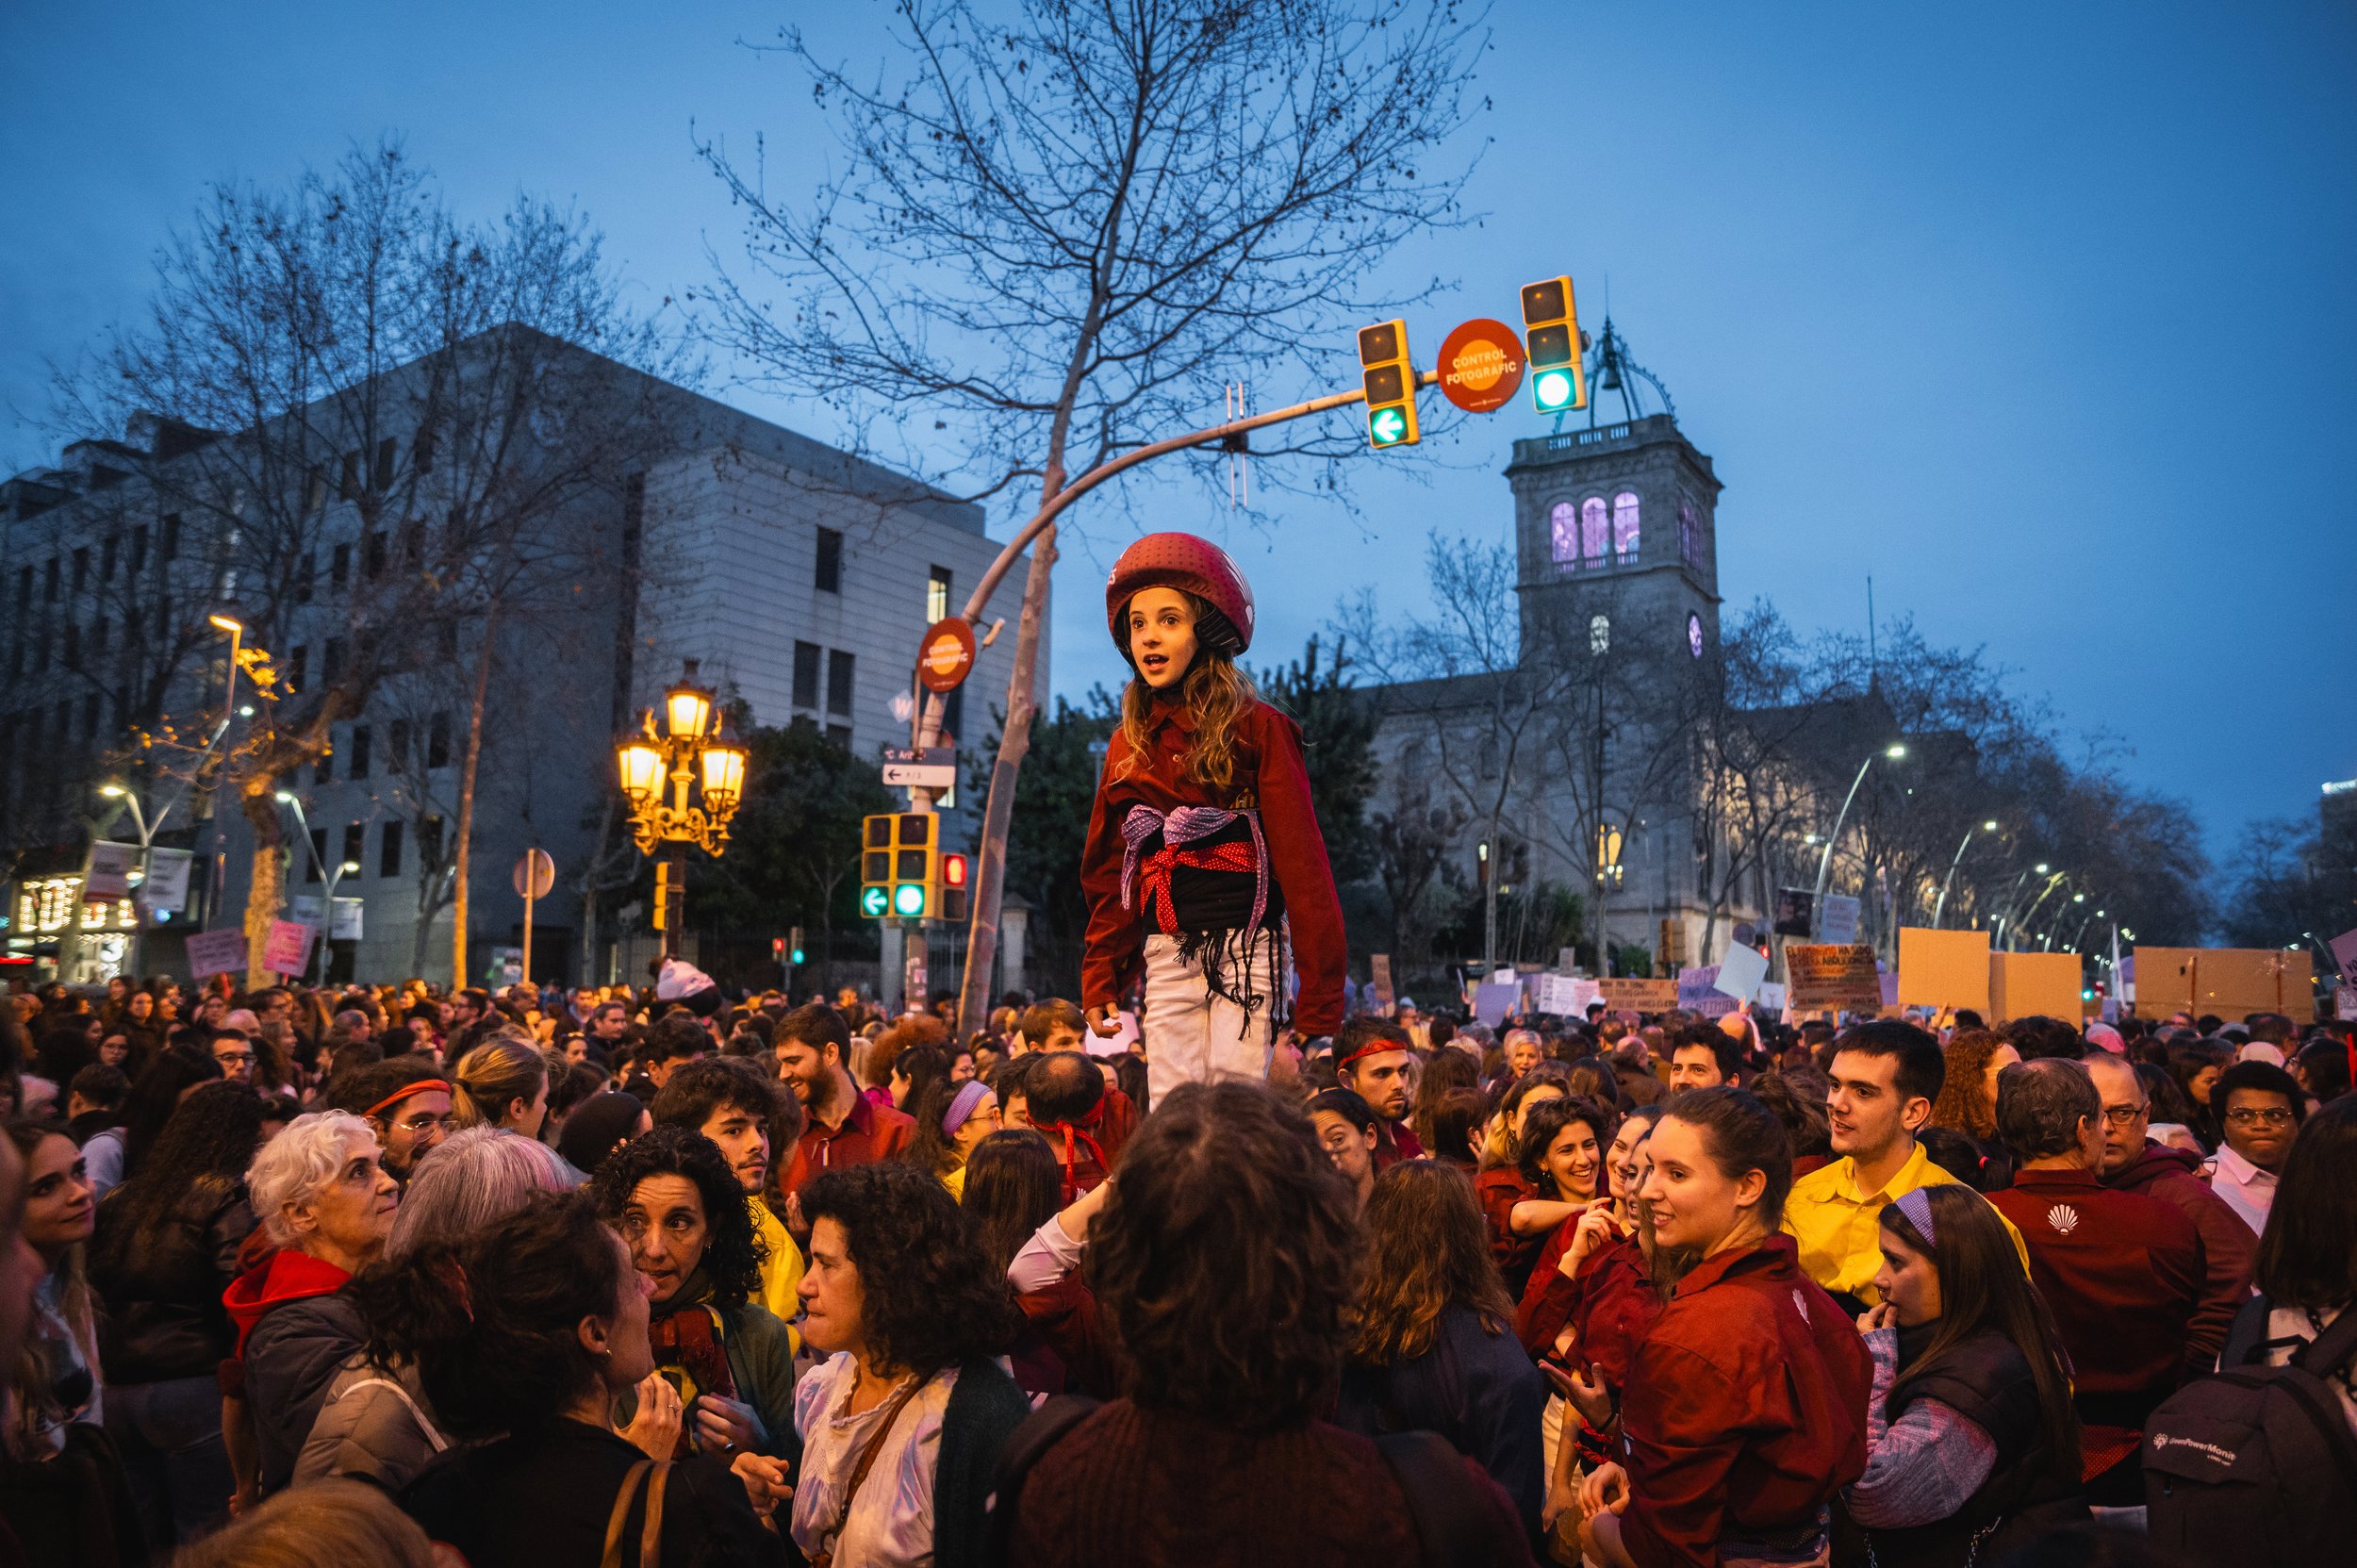  A child participating in a “castell,” the Catalan sport of building a human tower, looks at the crowd of thousands marching for International Women’s Day in Barcelona, Spain on Thursday, March 8, 2023. The child that climbs to the top of the tower i